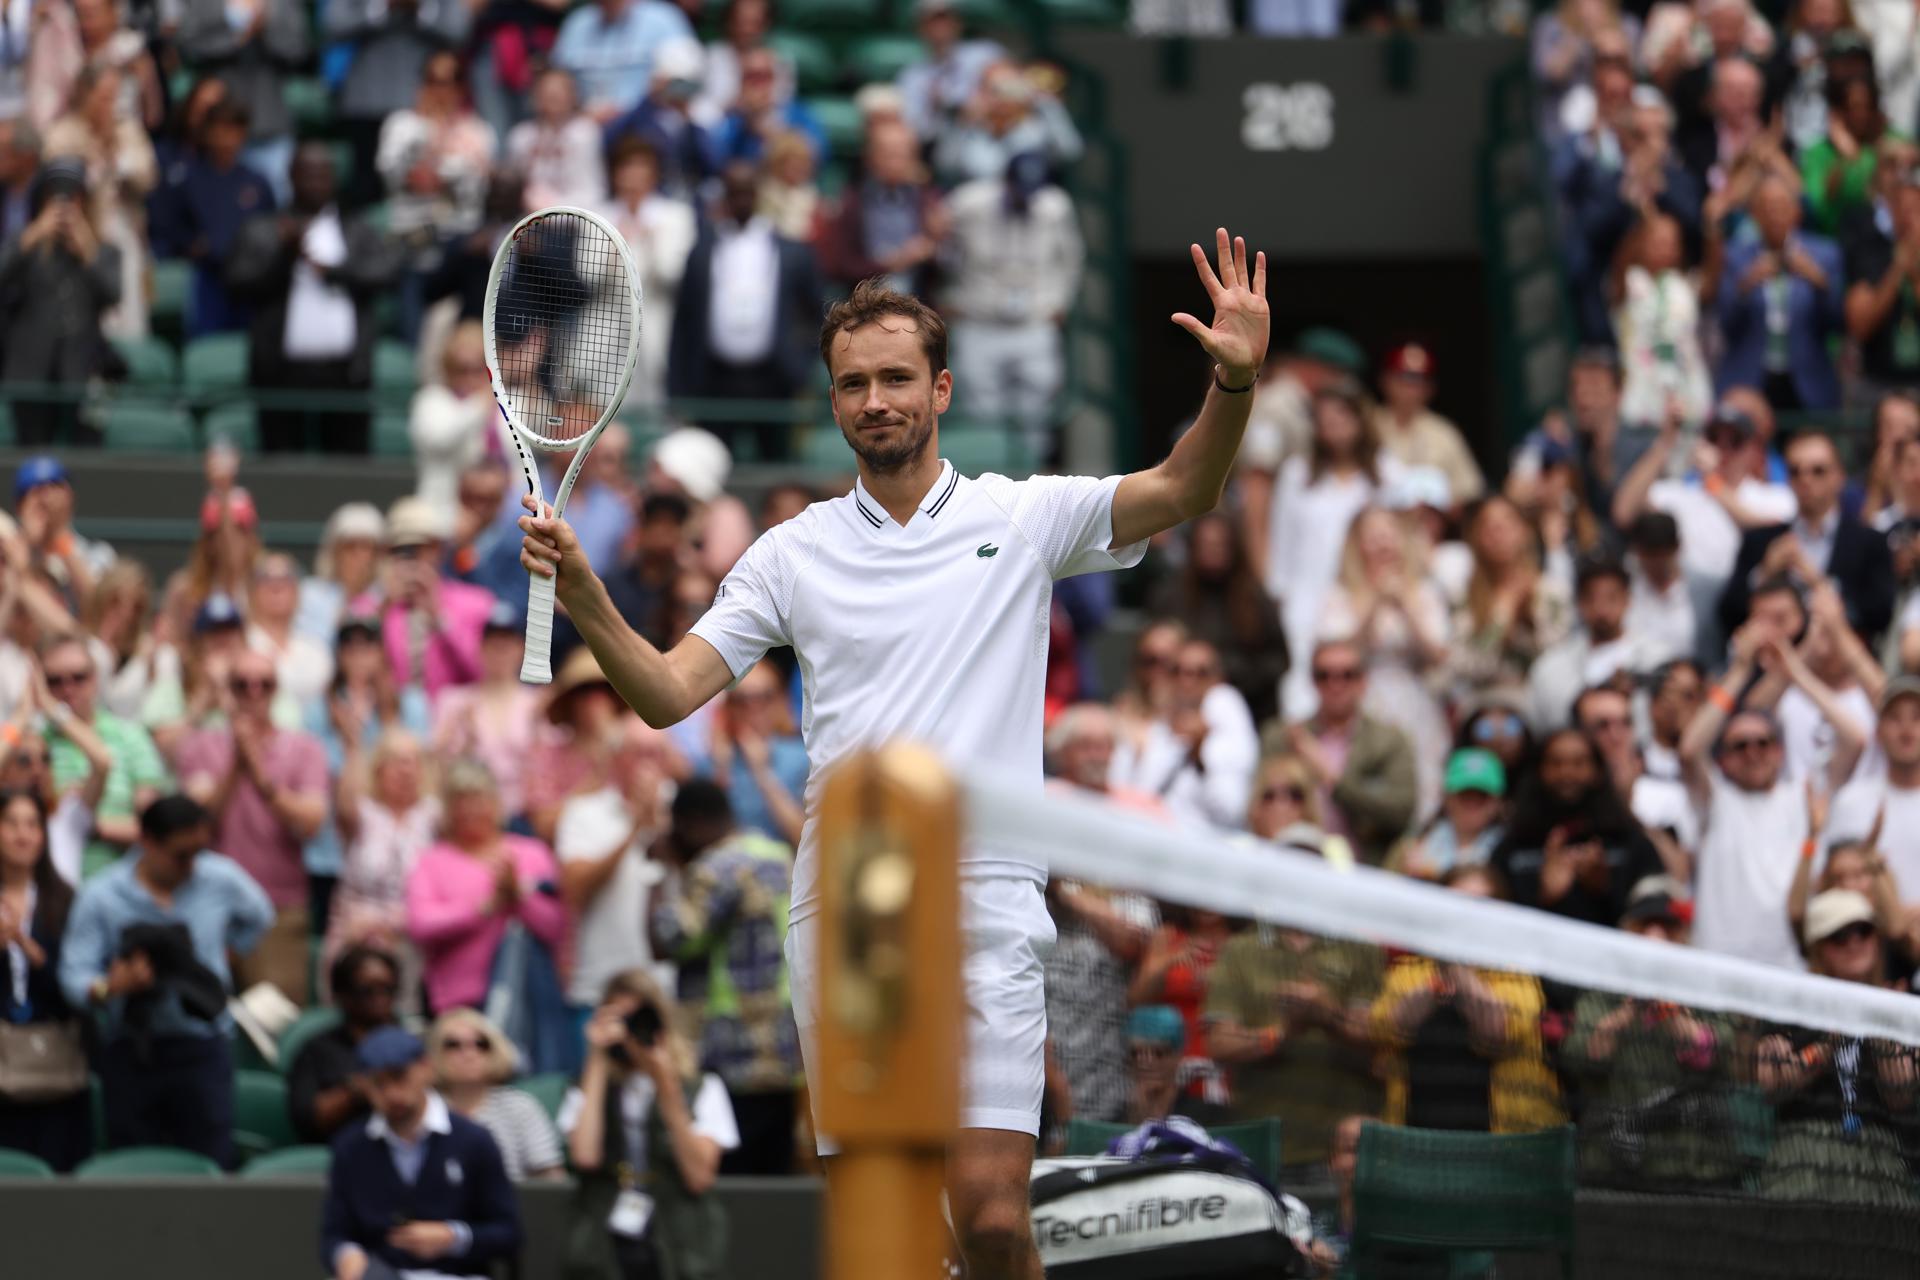 Russian No. 3 seed Daniil Medvedev celebrates after winning his men's singles first-round match against Arthur Fery of Britain at the Wimbledon Championships, Wimbledon, Britain, on 5 July 2023. Medvedev won 7-5, 6-4, 6-3. EFE/EPA/ISABEL INFANTES EDITORIAL USE ONLY
